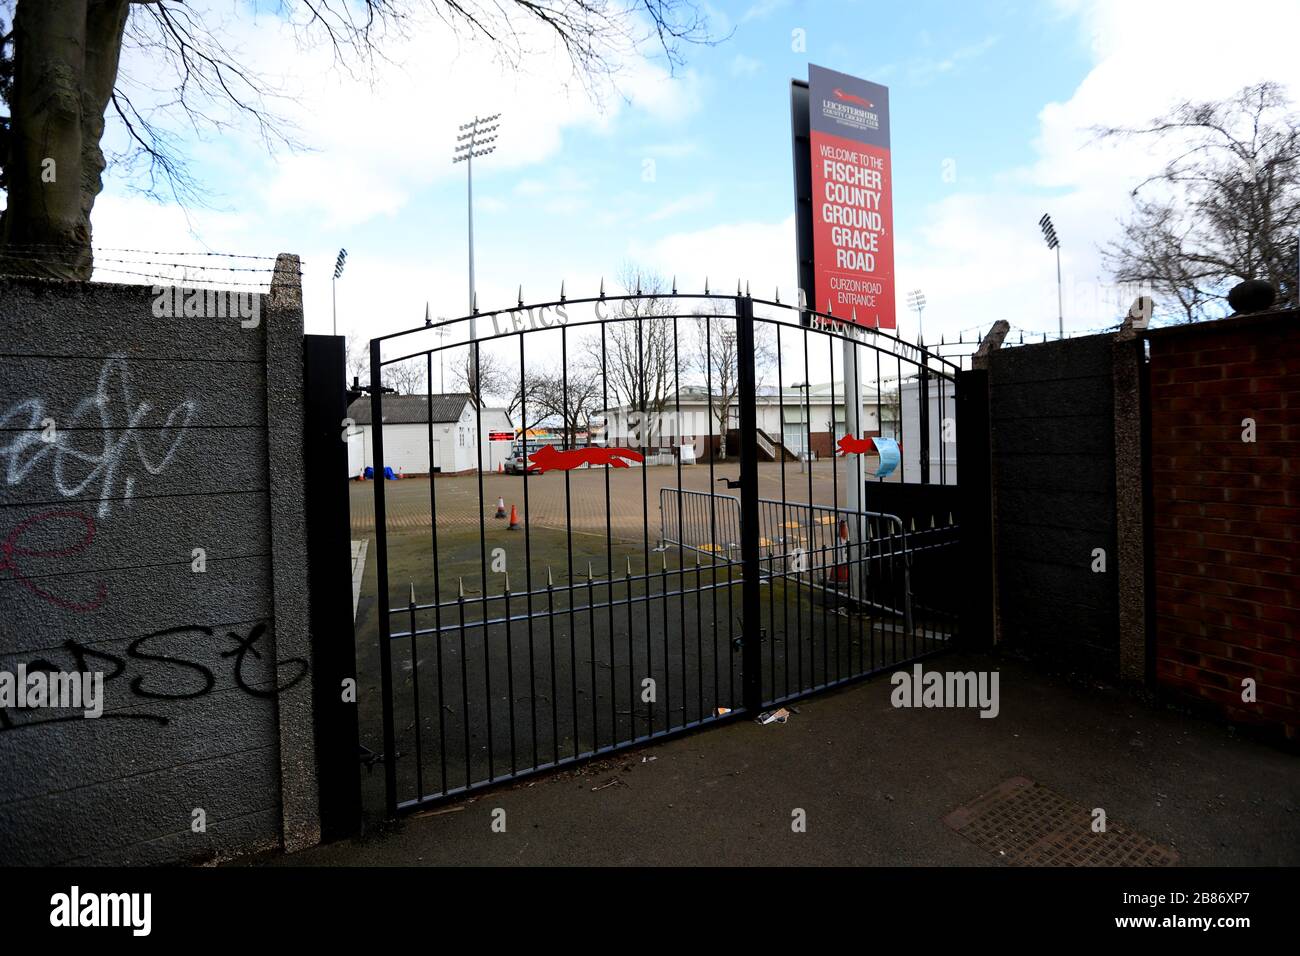 A general view of closed gates at the Fischer County Ground home of Leicestershire County Cricket Club after it was announced that The England and Wales Cricket Board (ECB) has recommended all forms of recreational cricket be suspended indefinitely because of coronavirus. Stock Photo